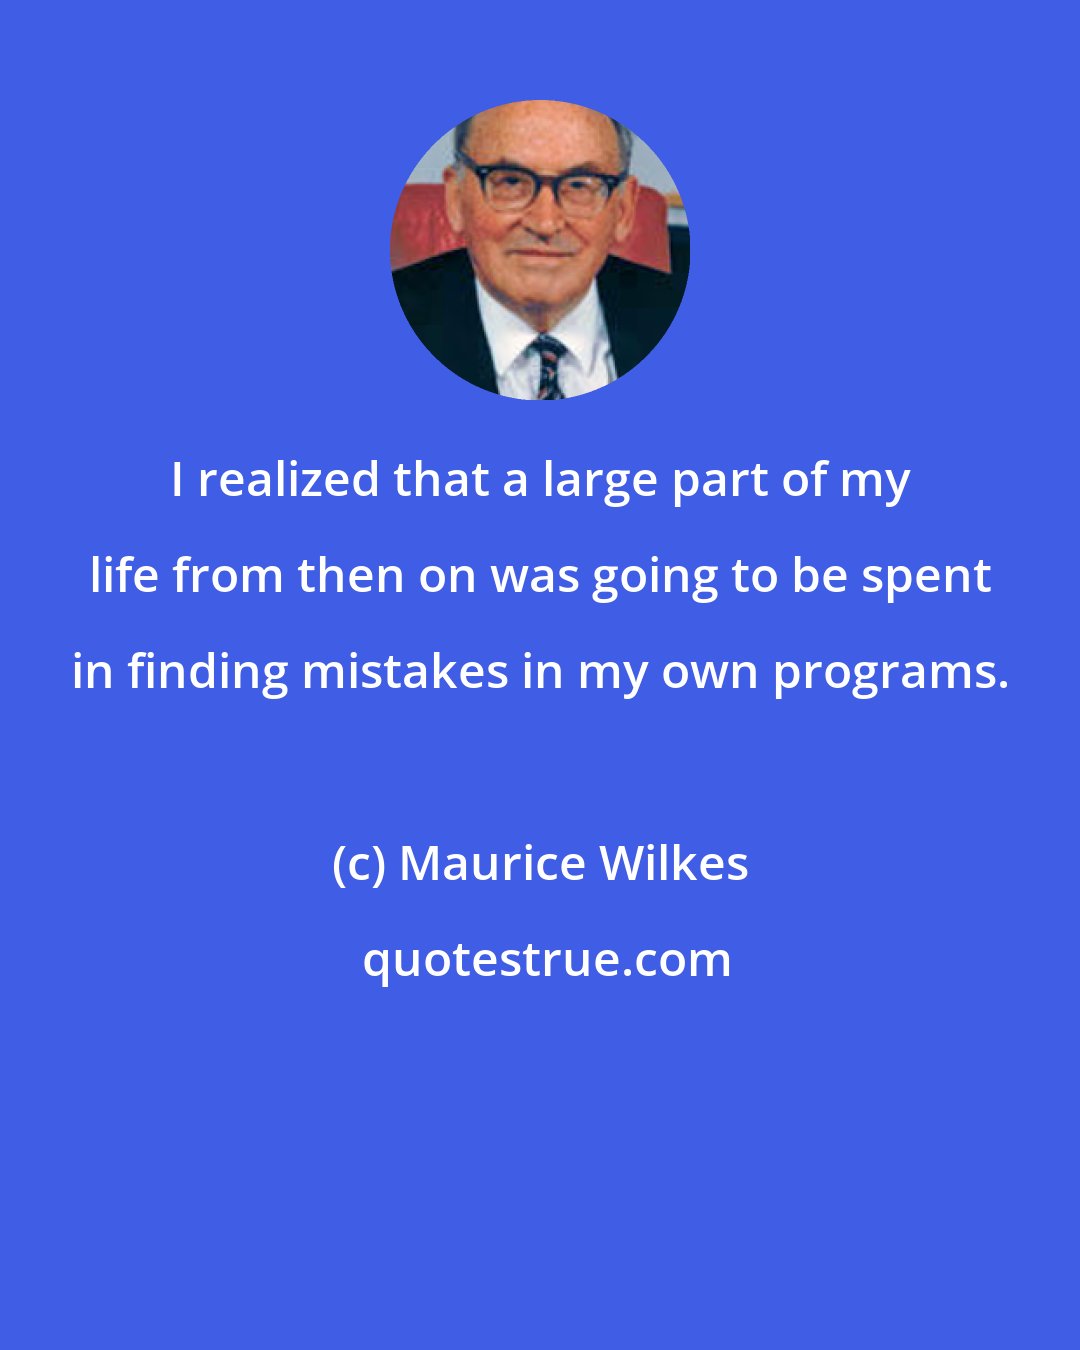 Maurice Wilkes: I realized that a large part of my life from then on was going to be spent in finding mistakes in my own programs.